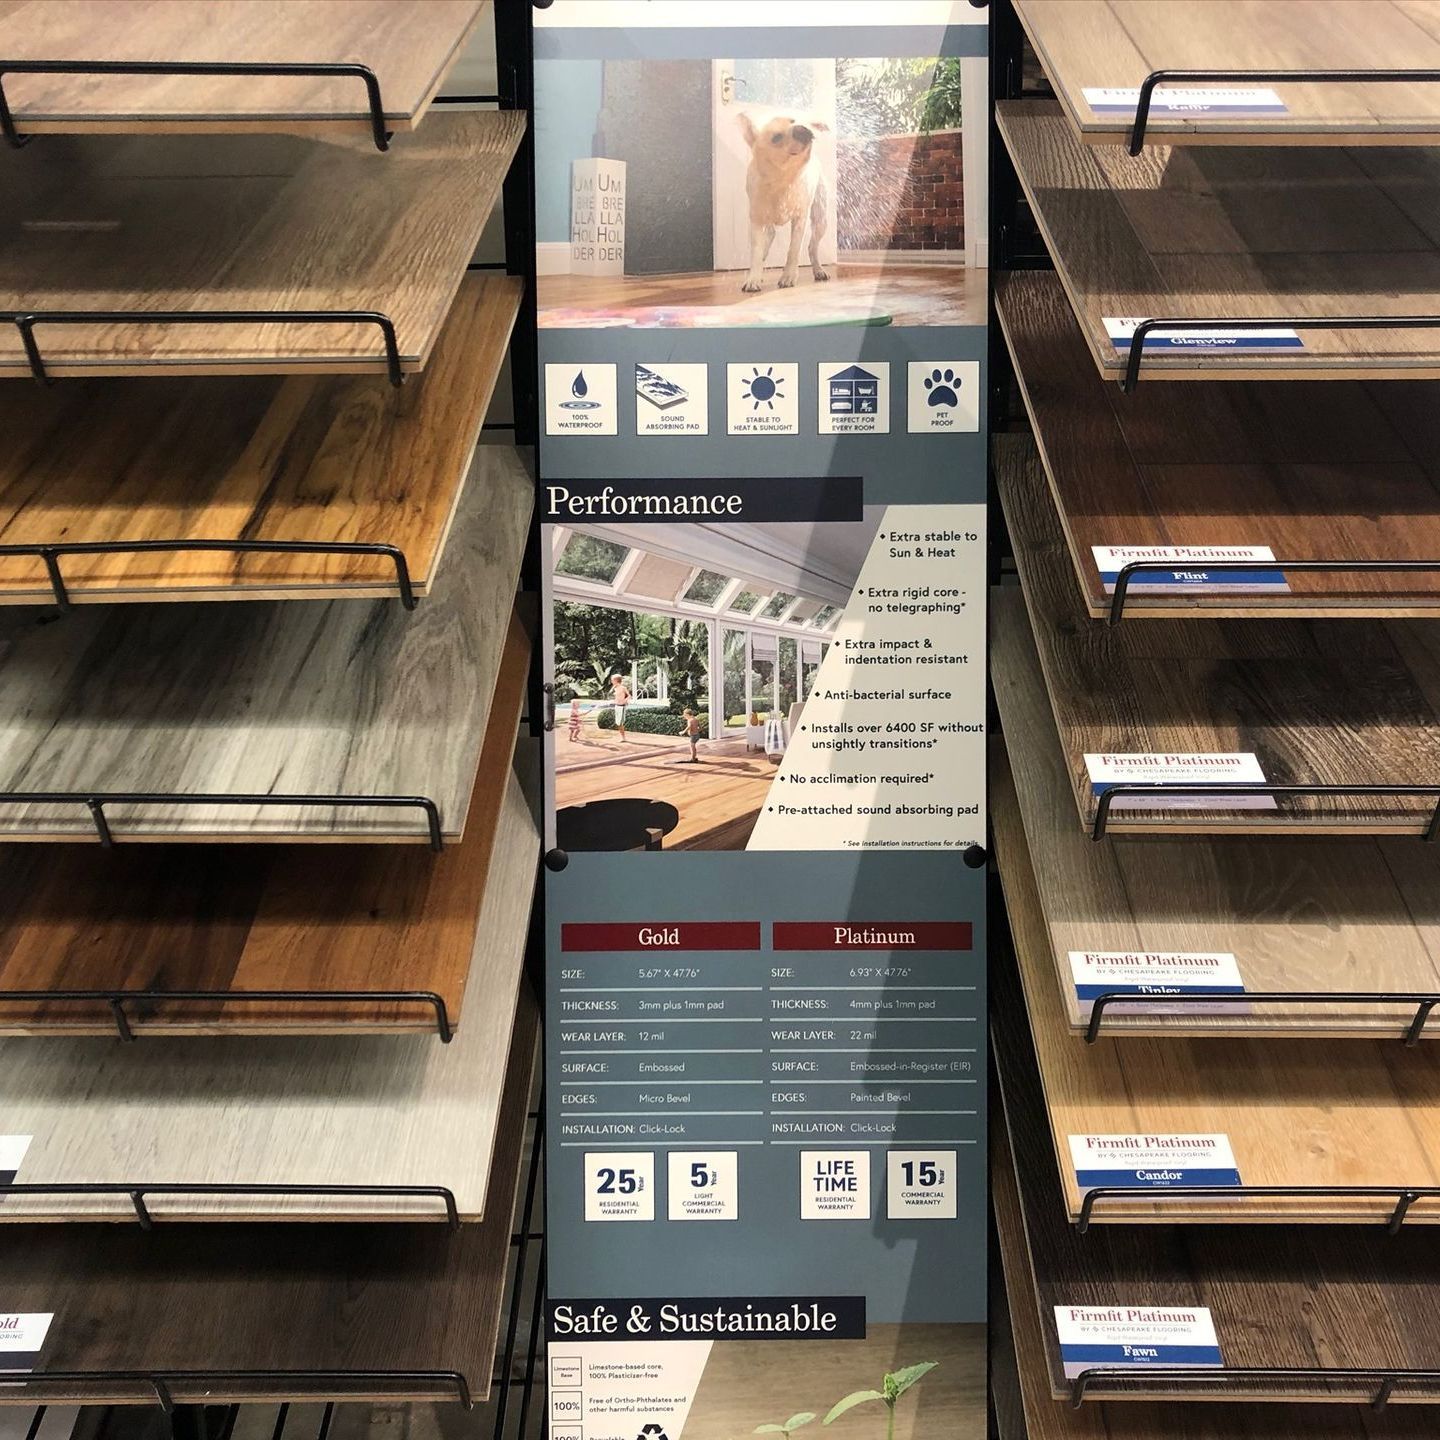 A display of different types of wood flooring in a store